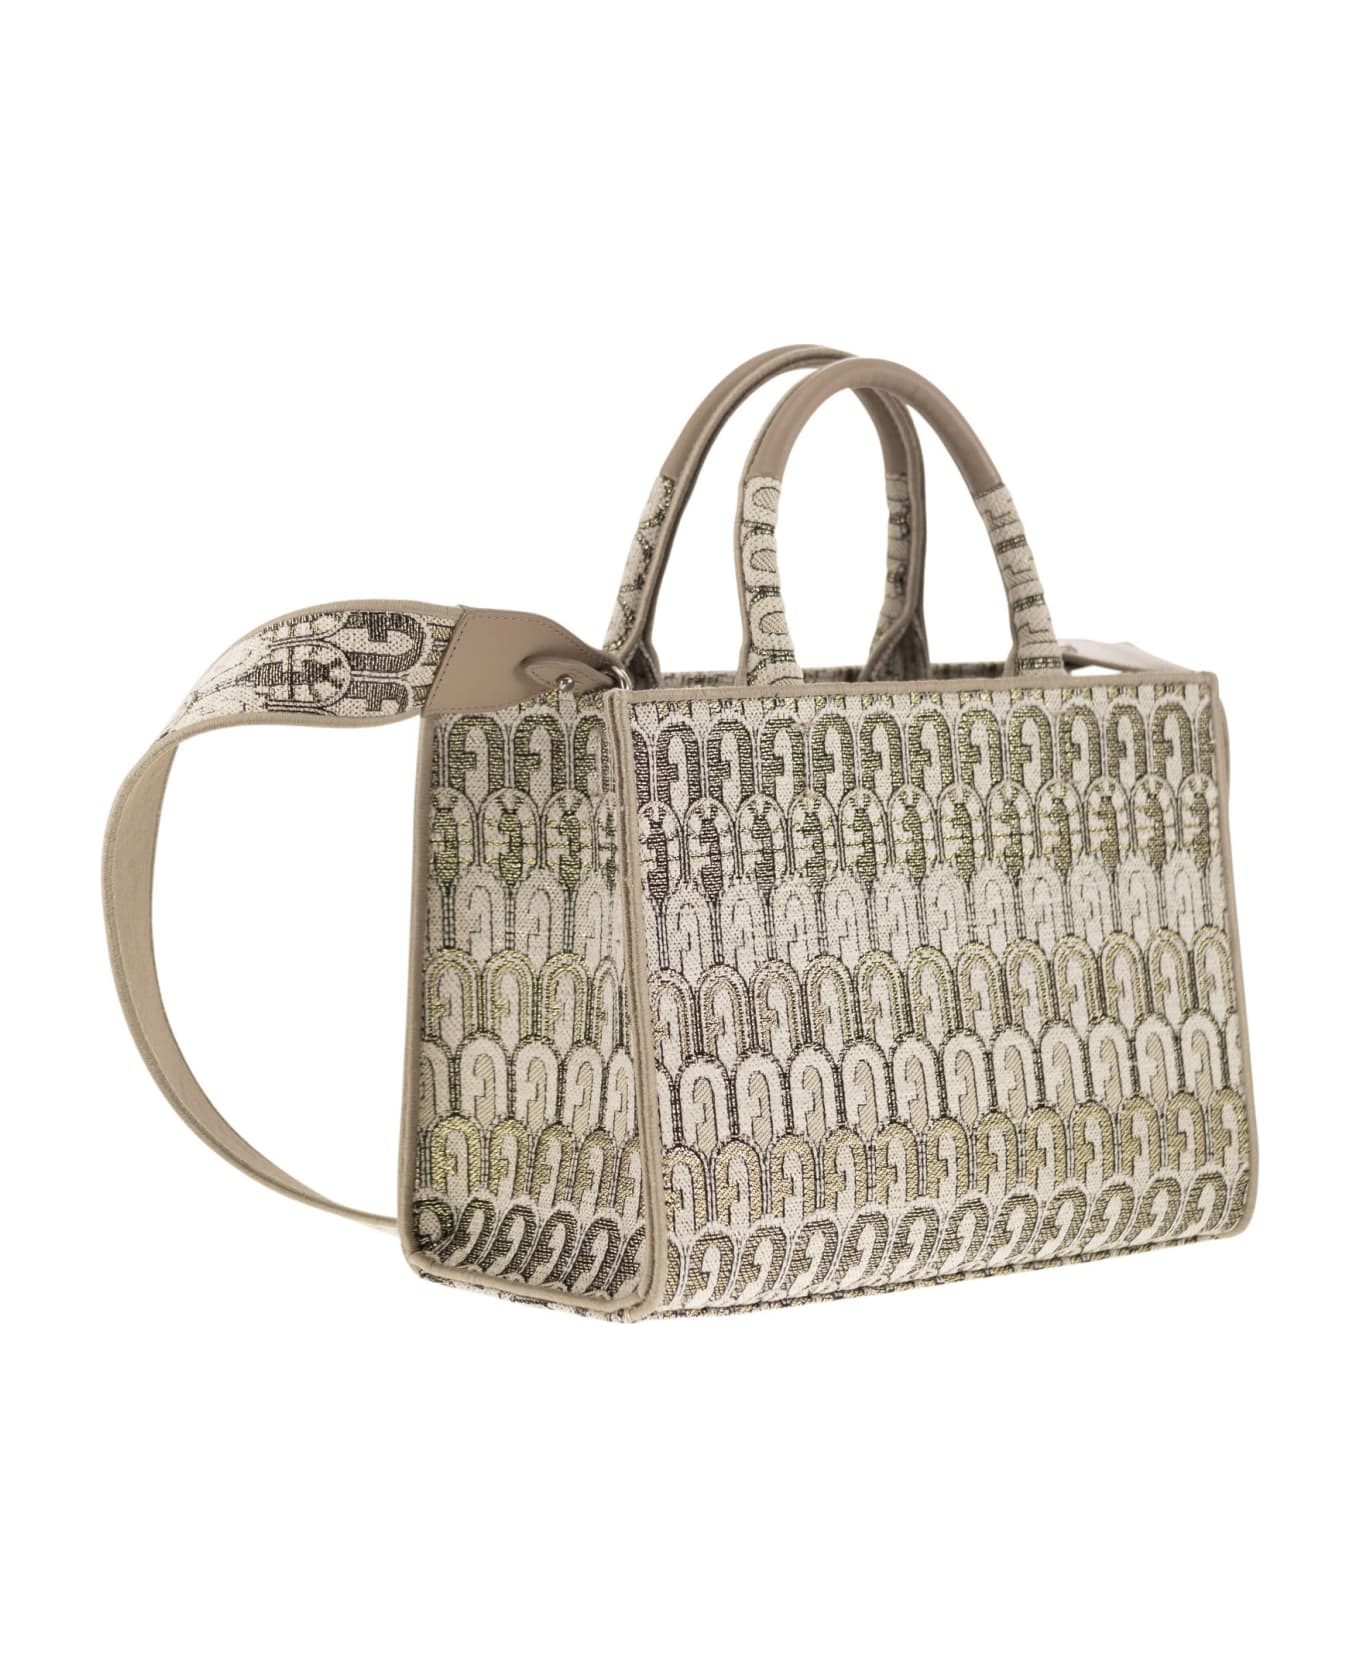 Furla Opportunity - Tote Bag Small - Beige トートバッグ